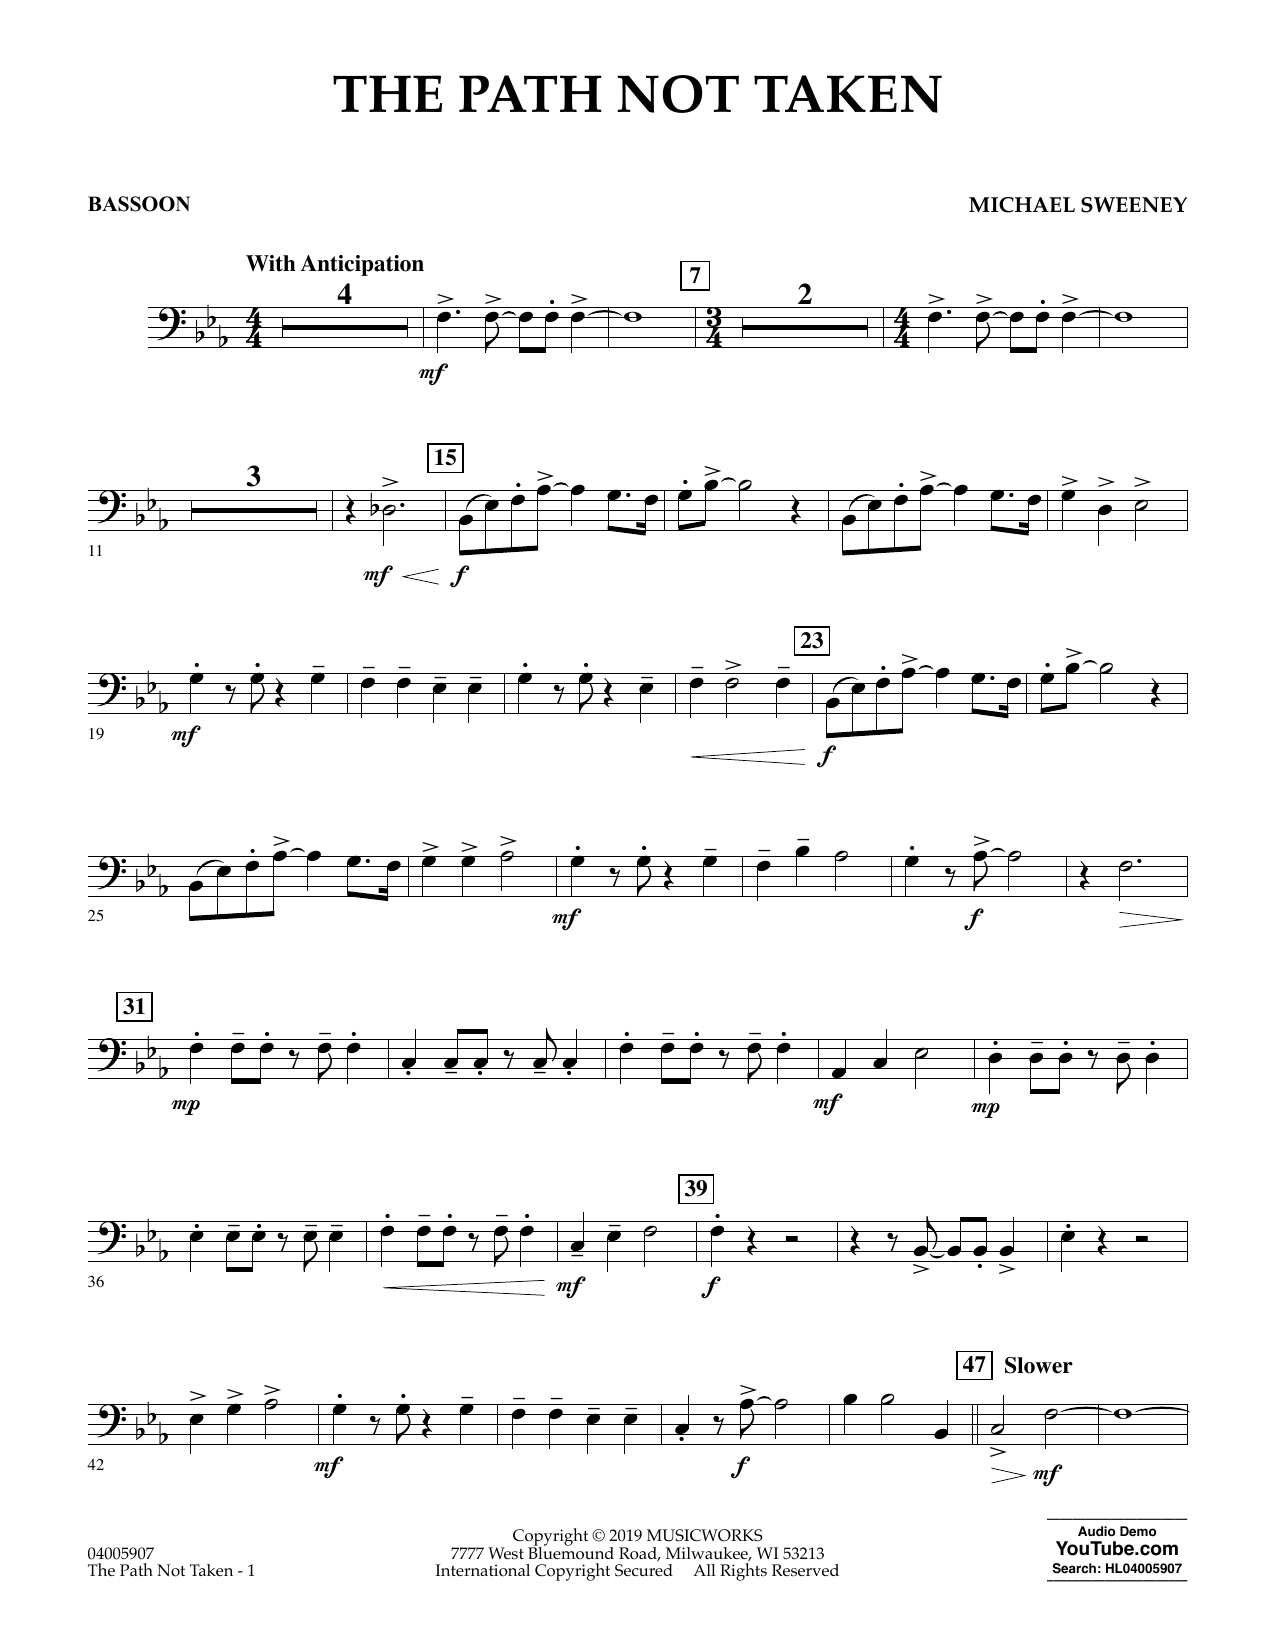 Michael Sweeney The Path Not Taken - Bassoon sheet music preview music notes and score for Concert Band including 2 page(s)